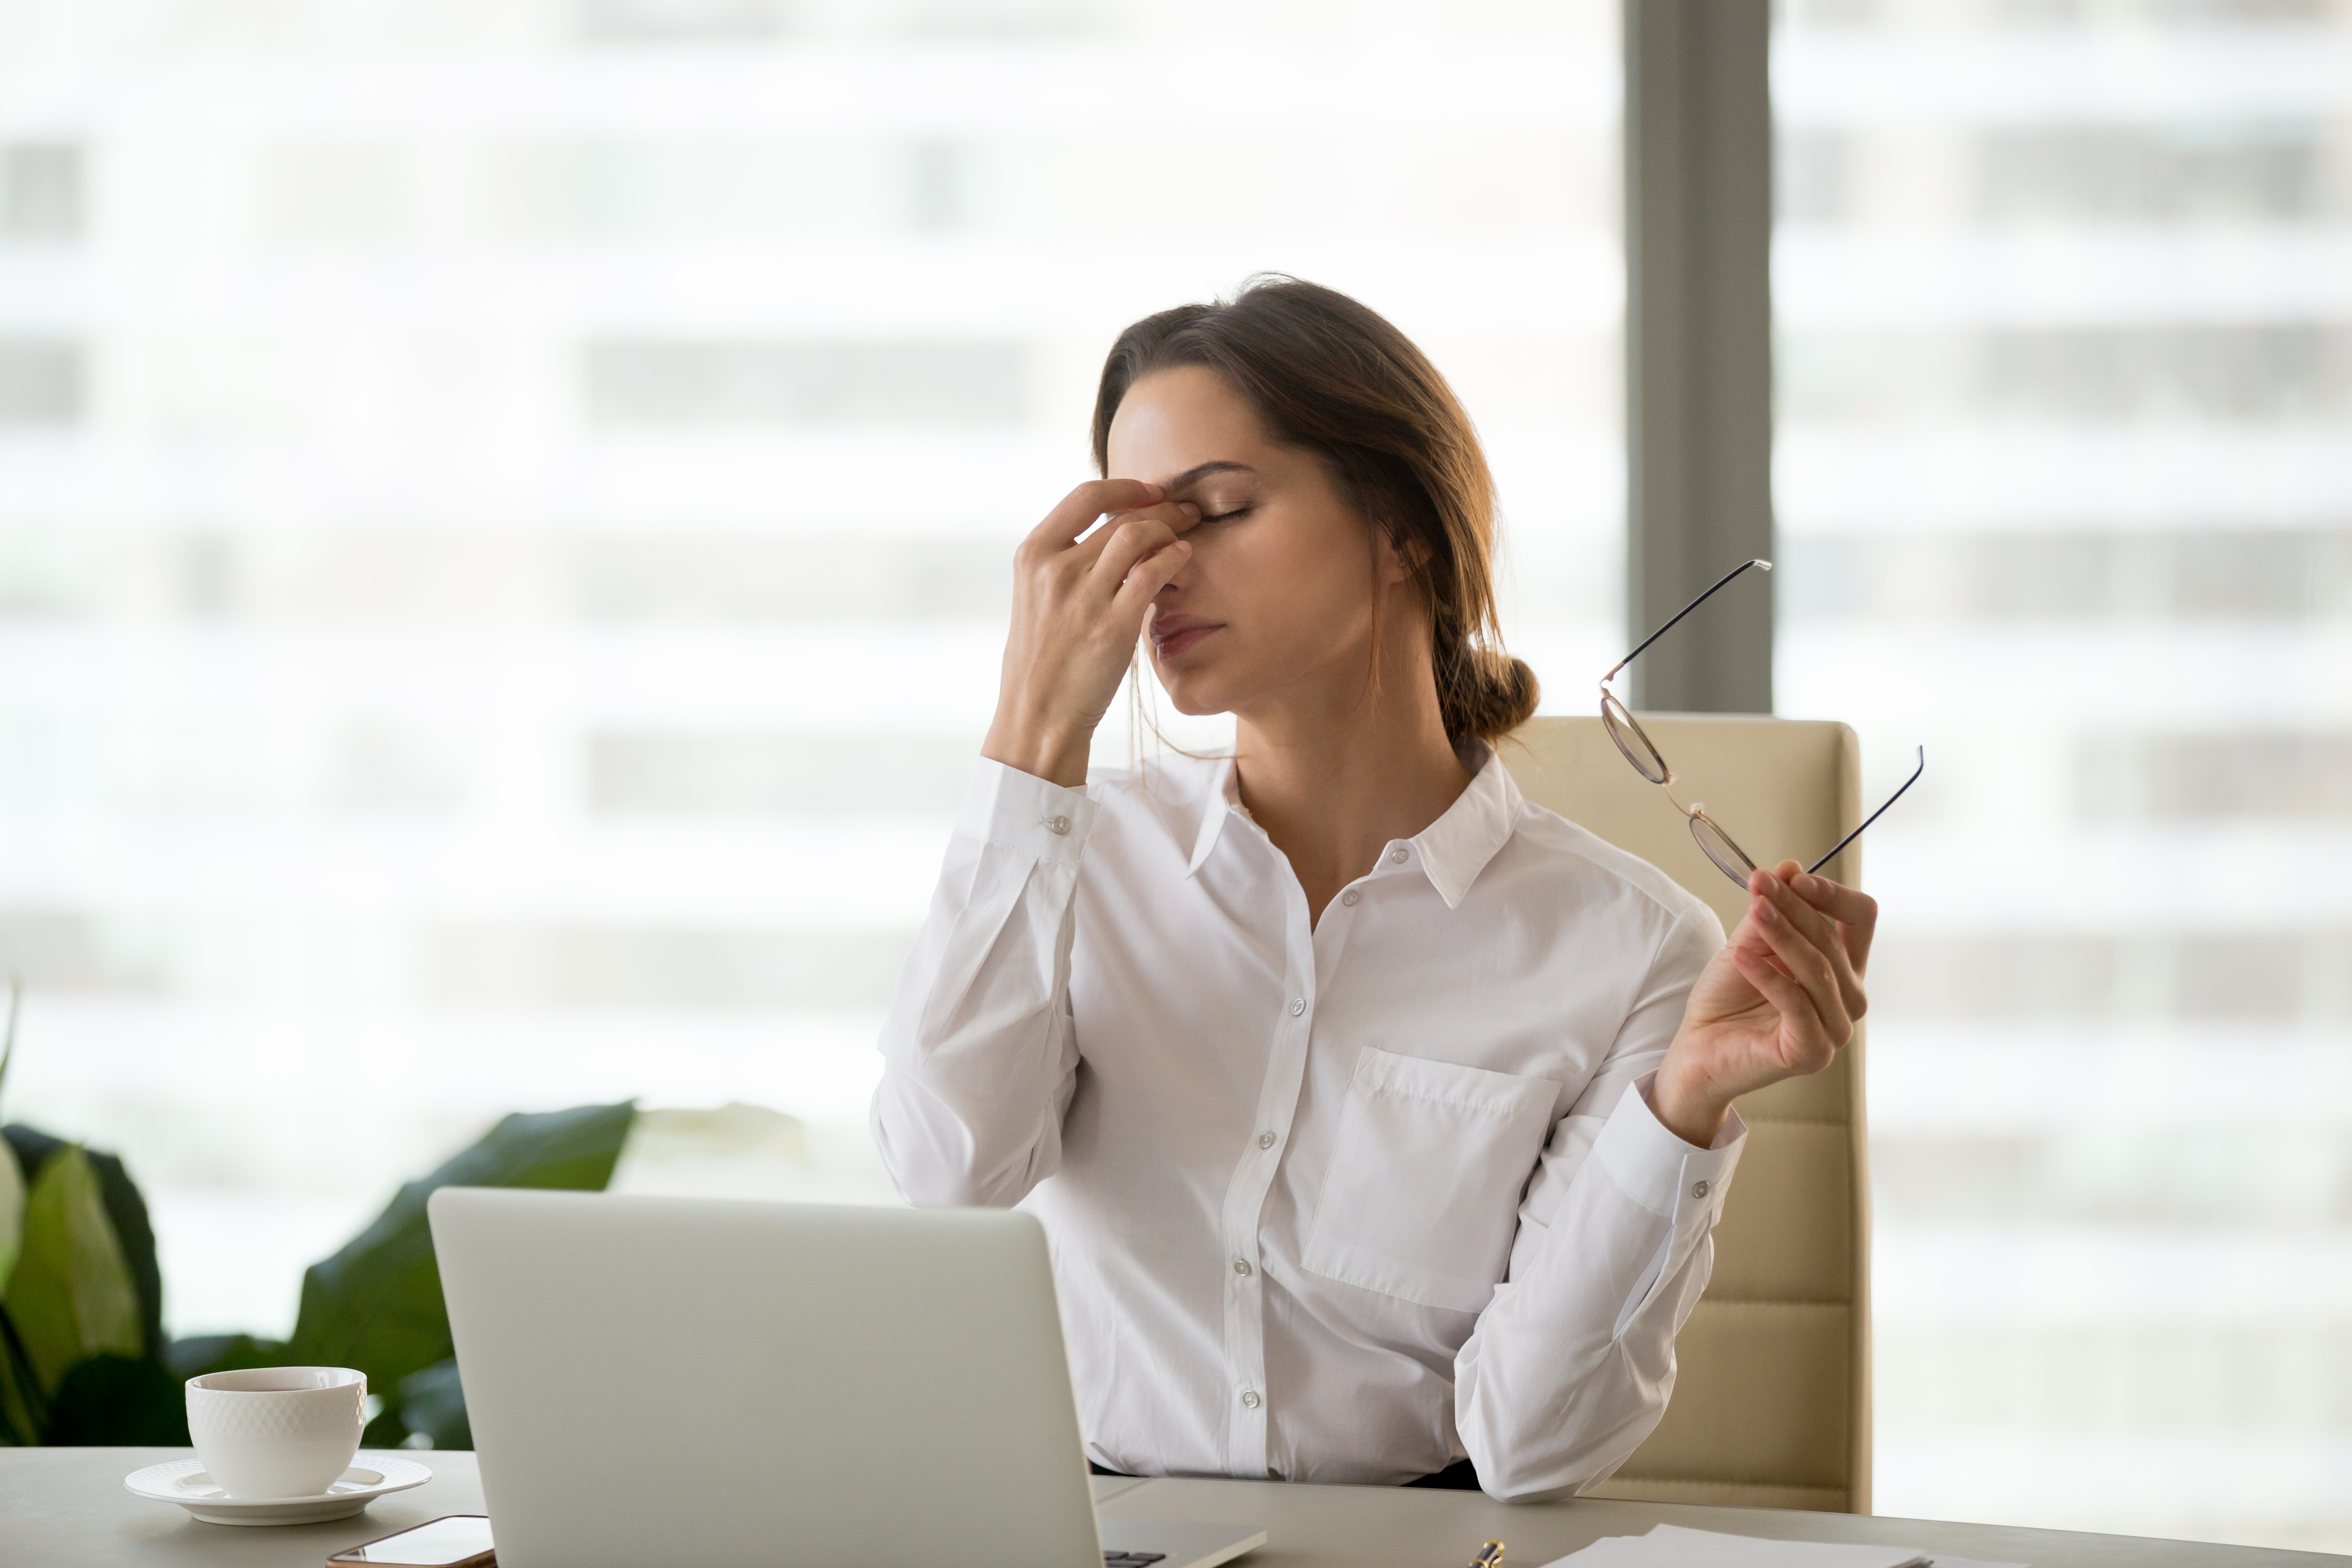 Fatigued businesswoman taking off glasses tired of computer work, exhausted employee suffering from blurry vision symptoms after long laptop use, overworked woman feels eye strain tension problem